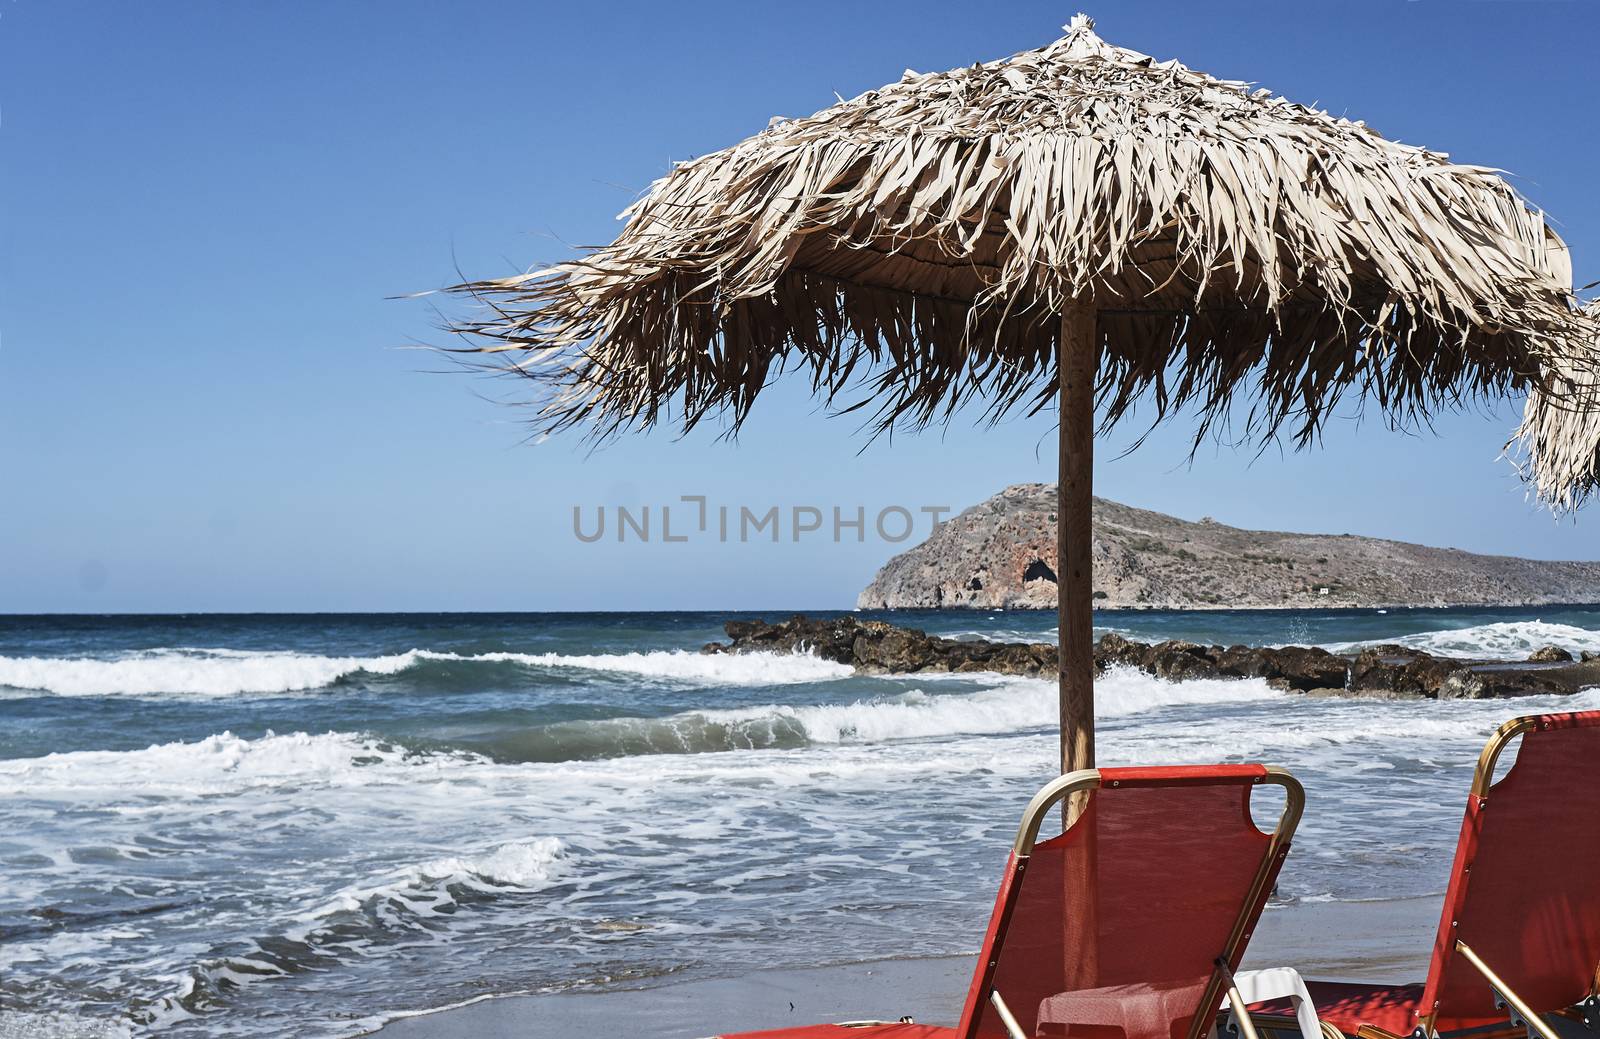 Sunbeds and umbrellas on the beach on the island of Crete, Greece